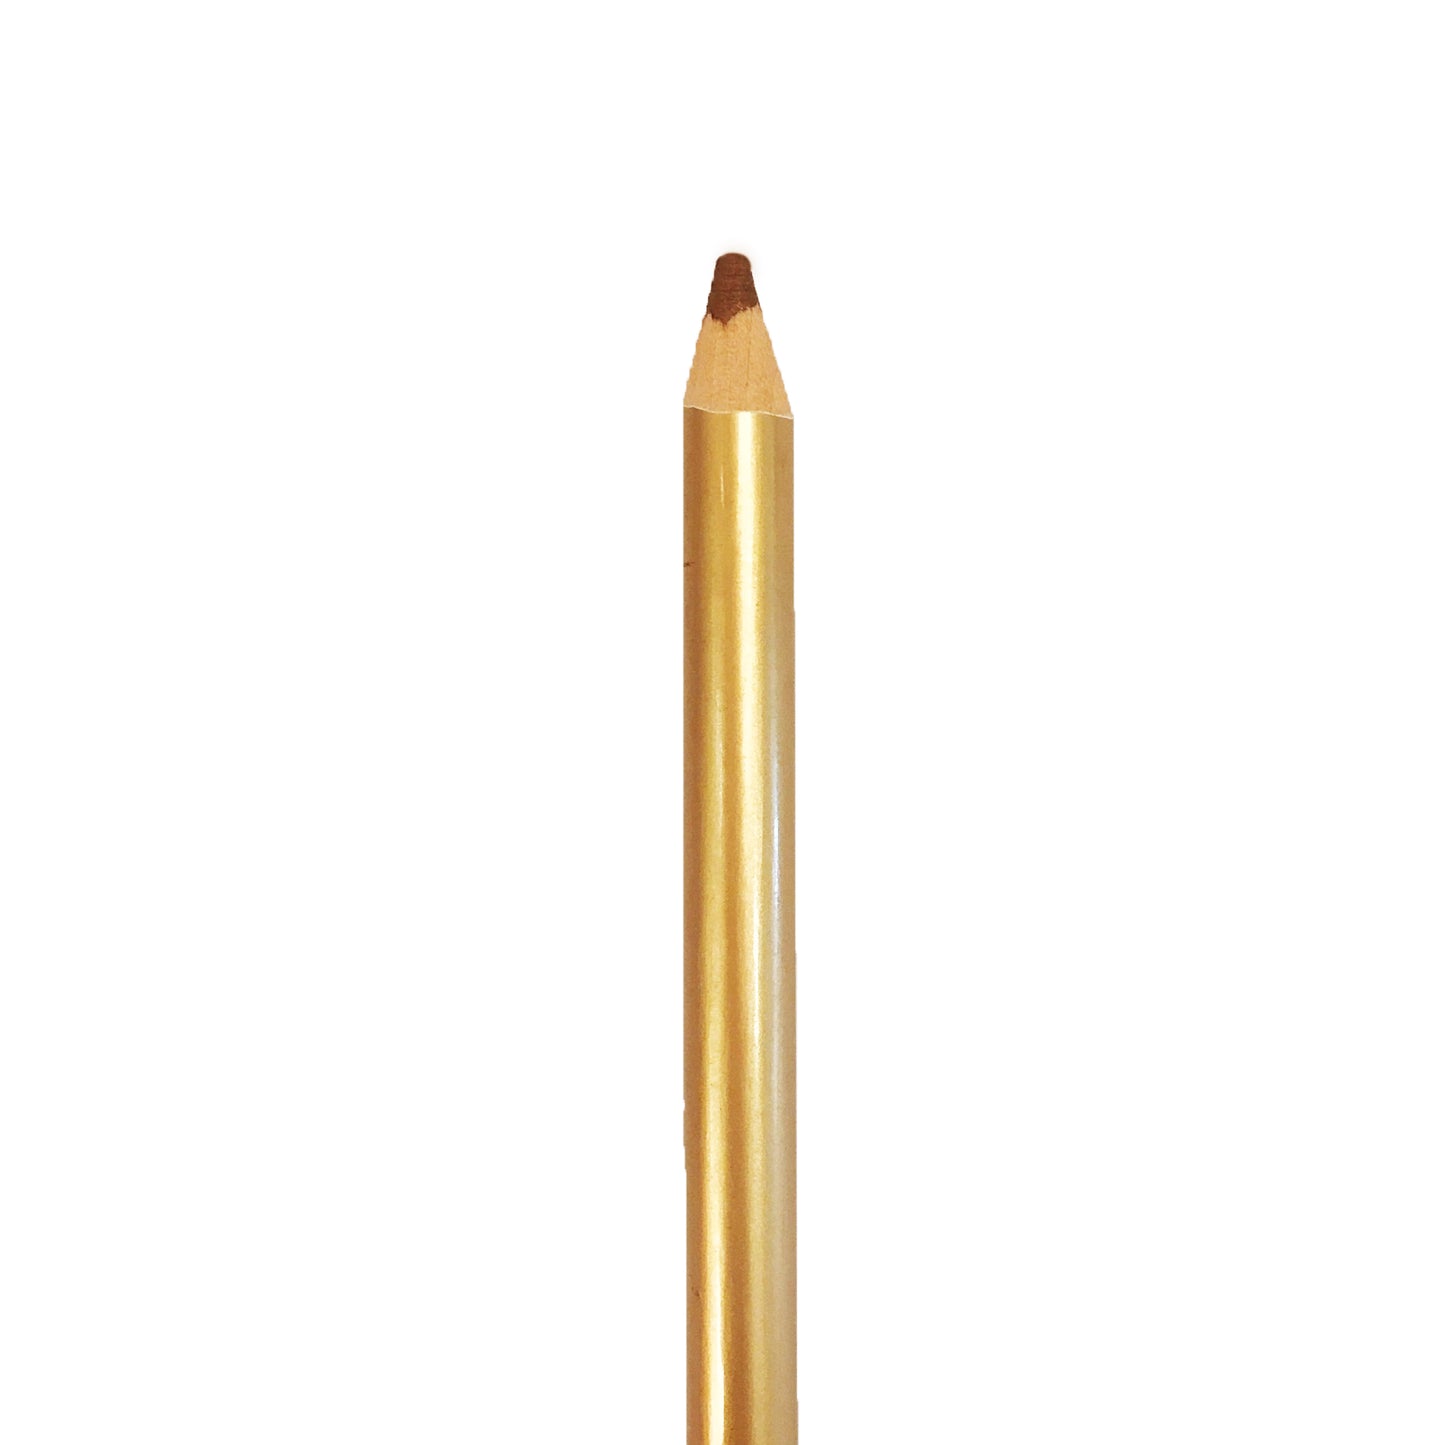 Bronze Pencil Eye Liner Pencil ready for your name by Indigo Private Label Cosmetics